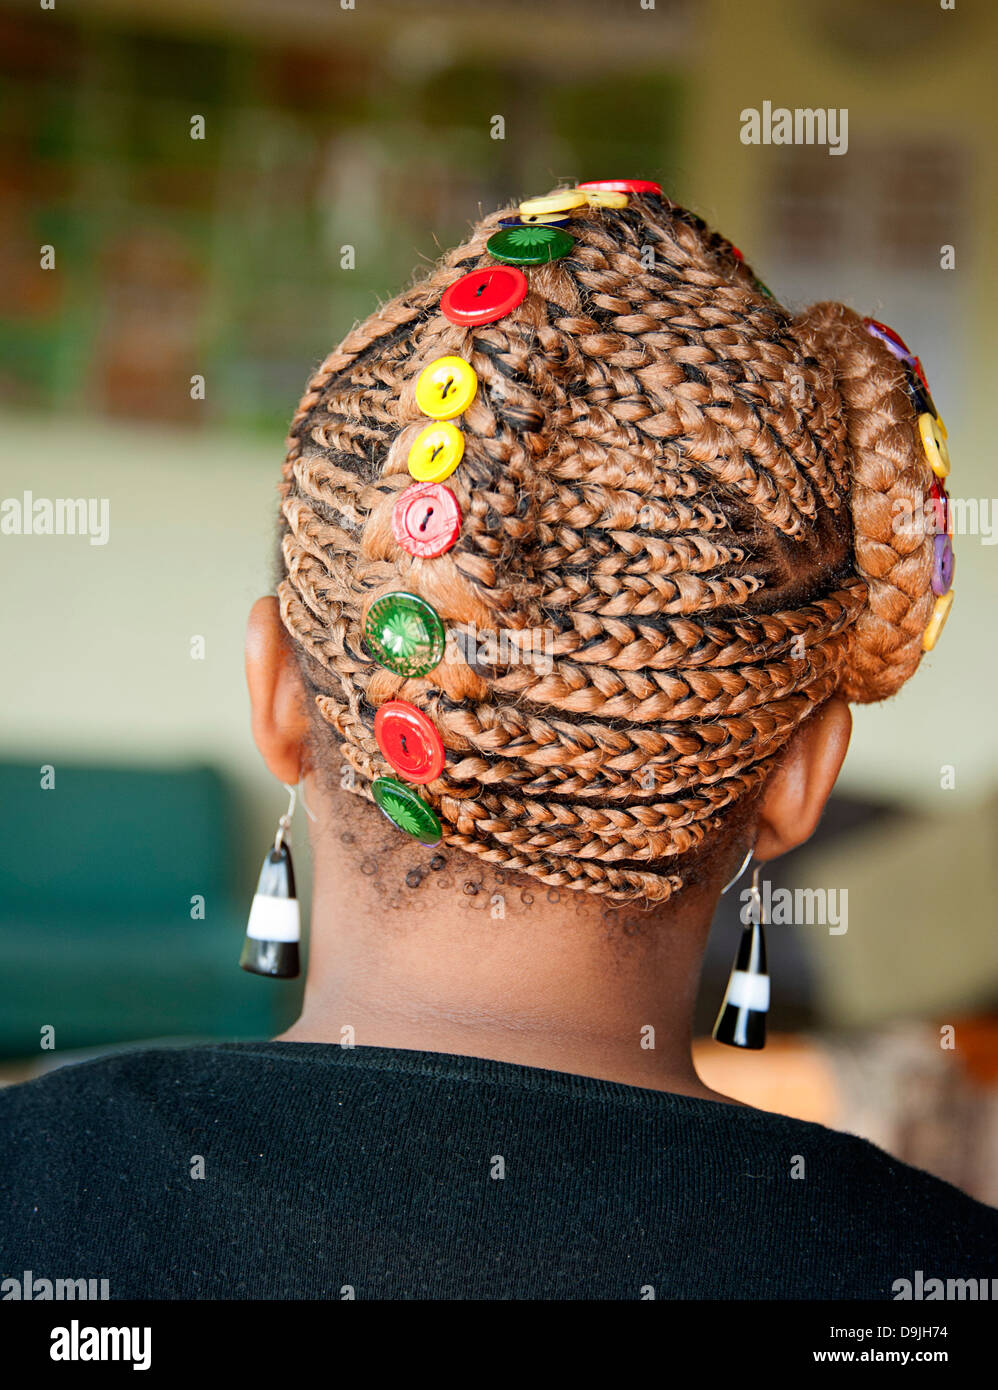 African lady wears original colorful button hat. South Africa. Stock Photo